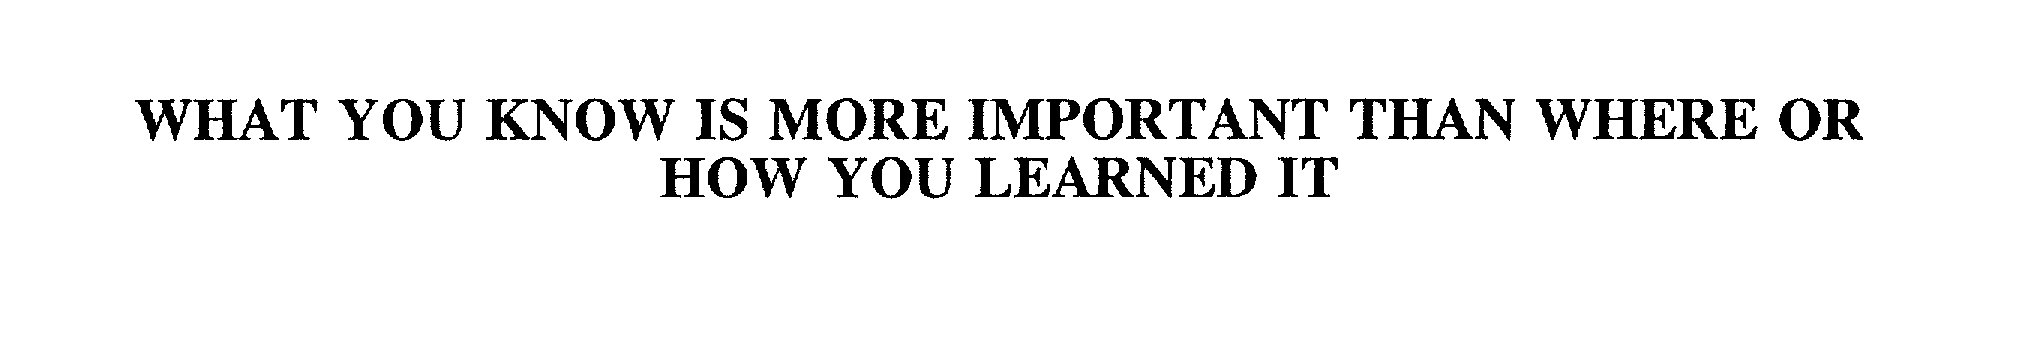  WHAT YOU KNOW IS MORE IMPORTANT THAN WHERE OR HOW YOU LEARNED IT